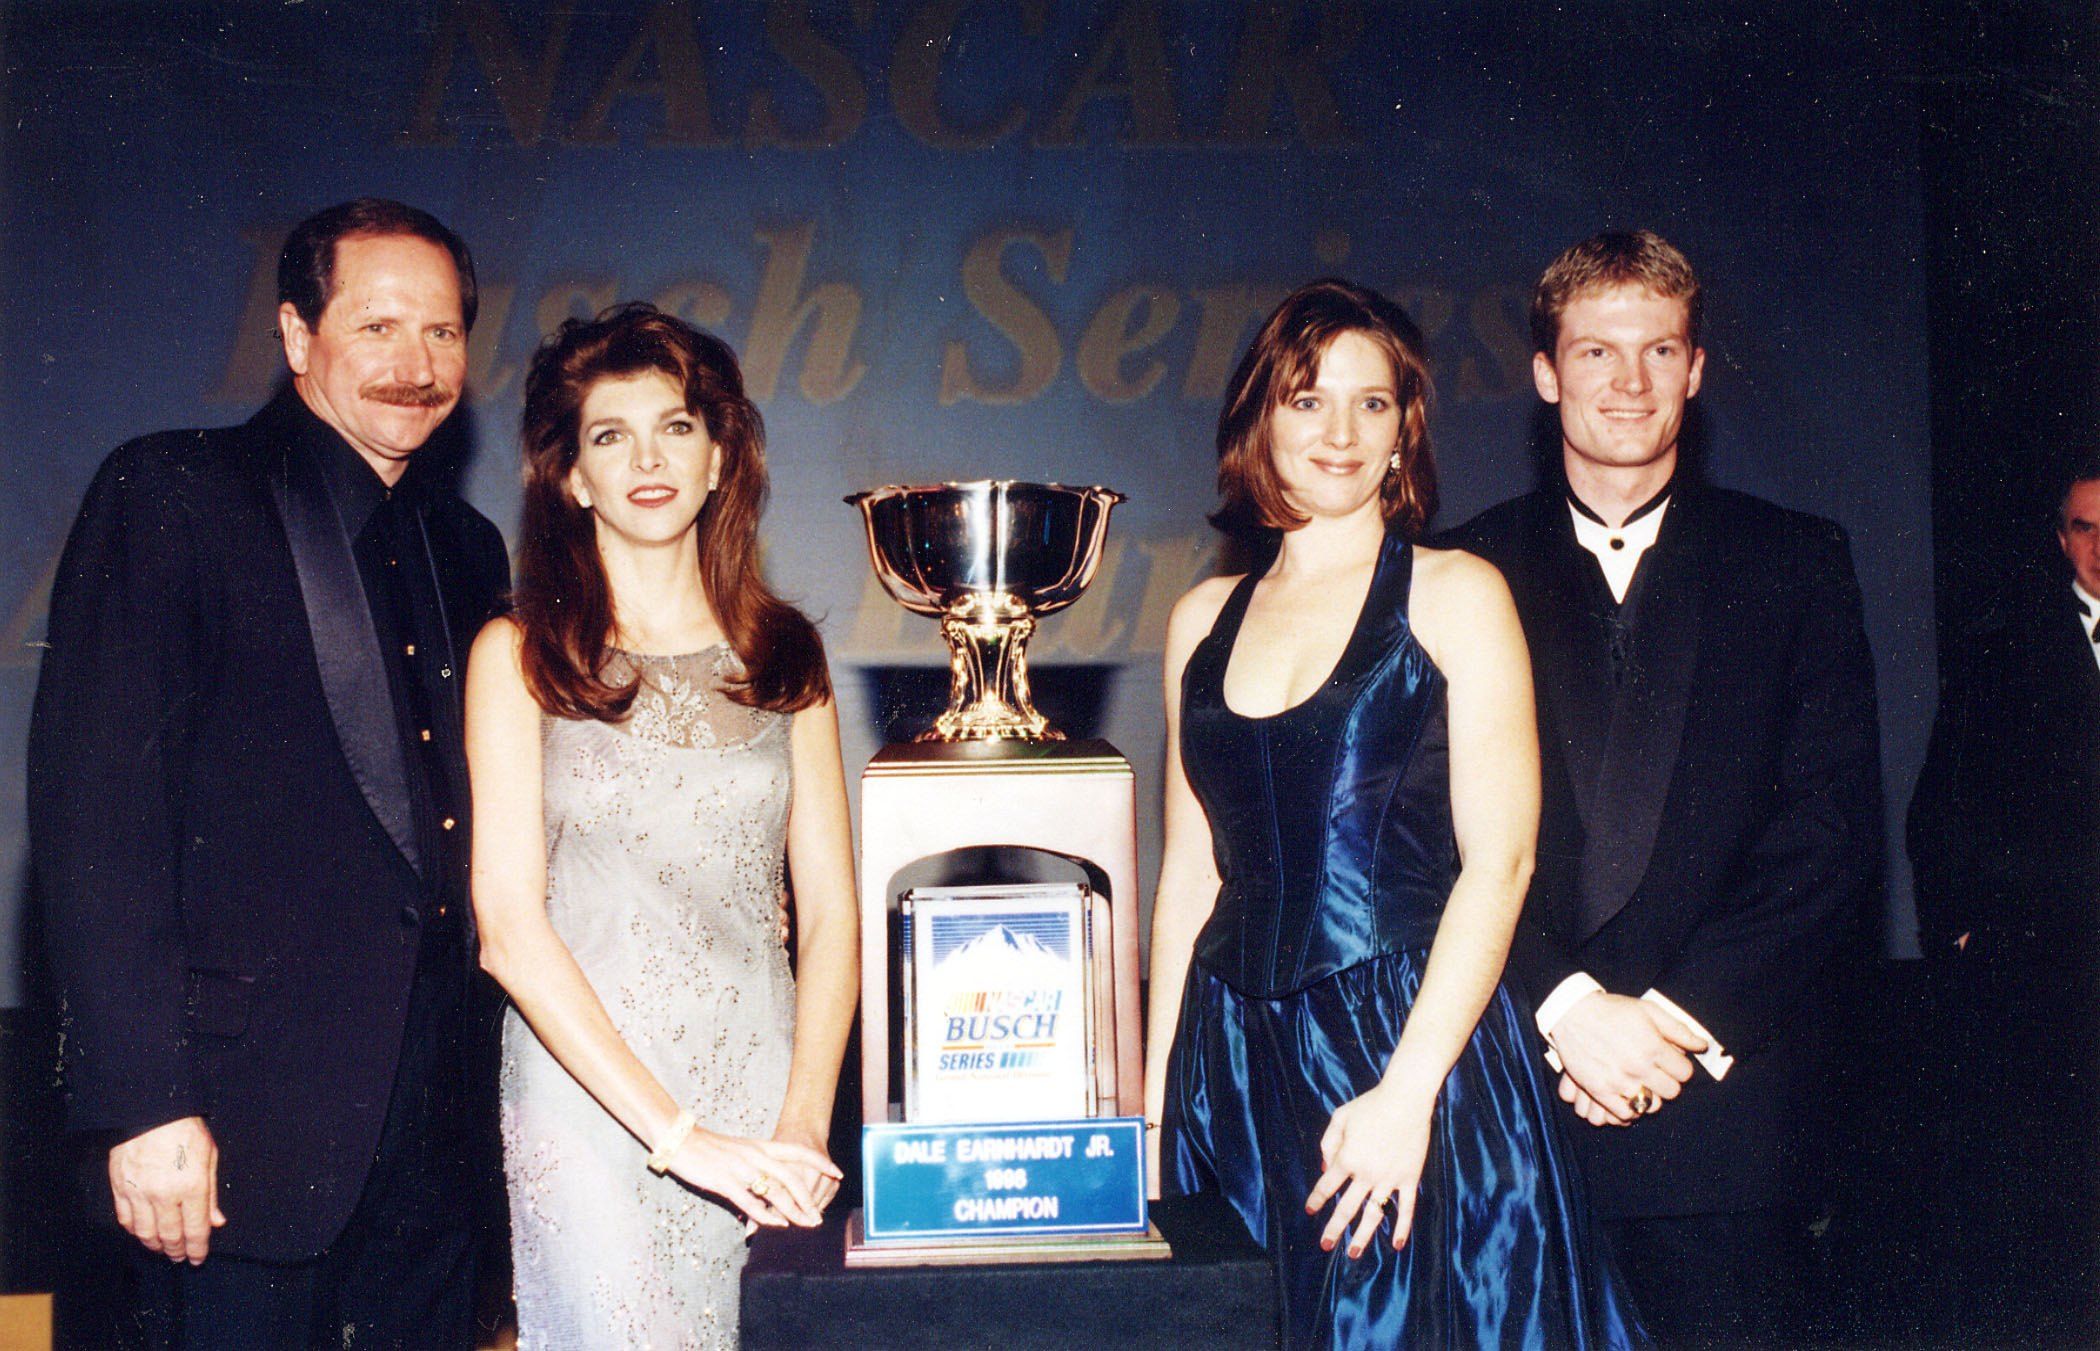 Dale Earnhardt Sr., with wife Teresa, daughter Kelley and son Dale Earnhardt Jr., who received the NASCAR Busch Series Championship Cup in 1998 in New York | Source: Getty Images